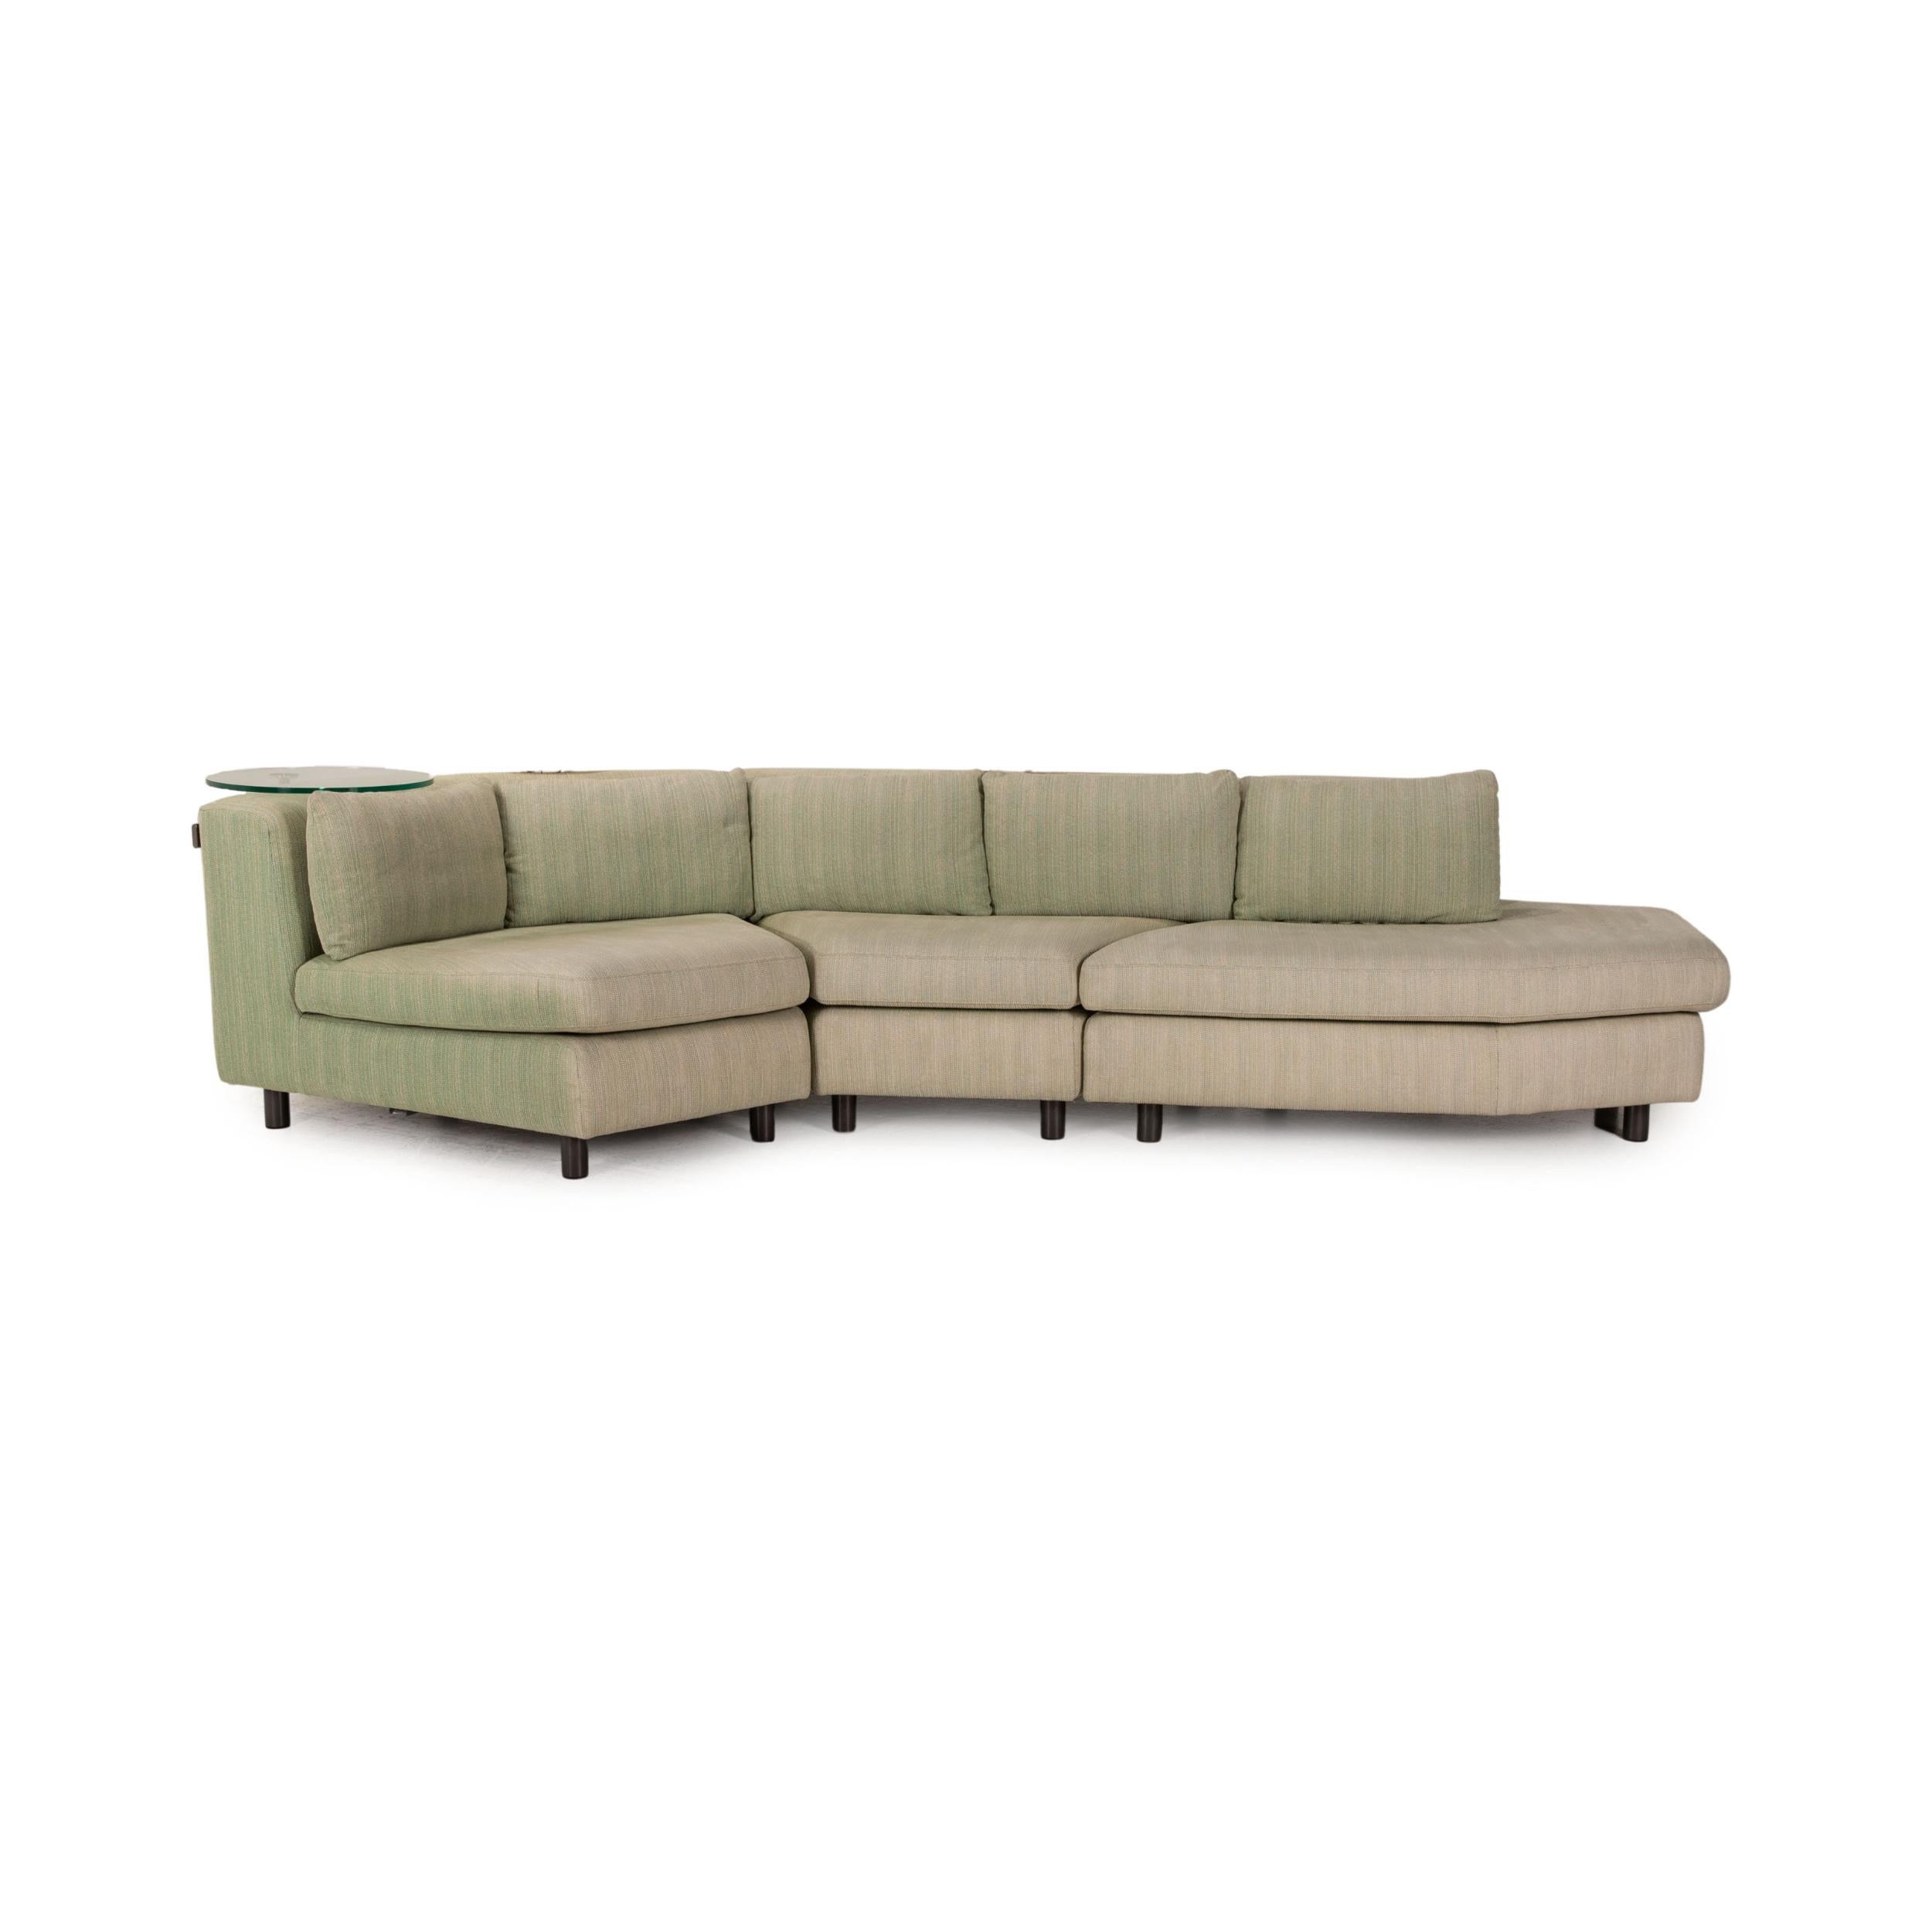 Modern Rolf Benz Loft Fabric Sofa Mint Four-Seater Couch Function For Sale